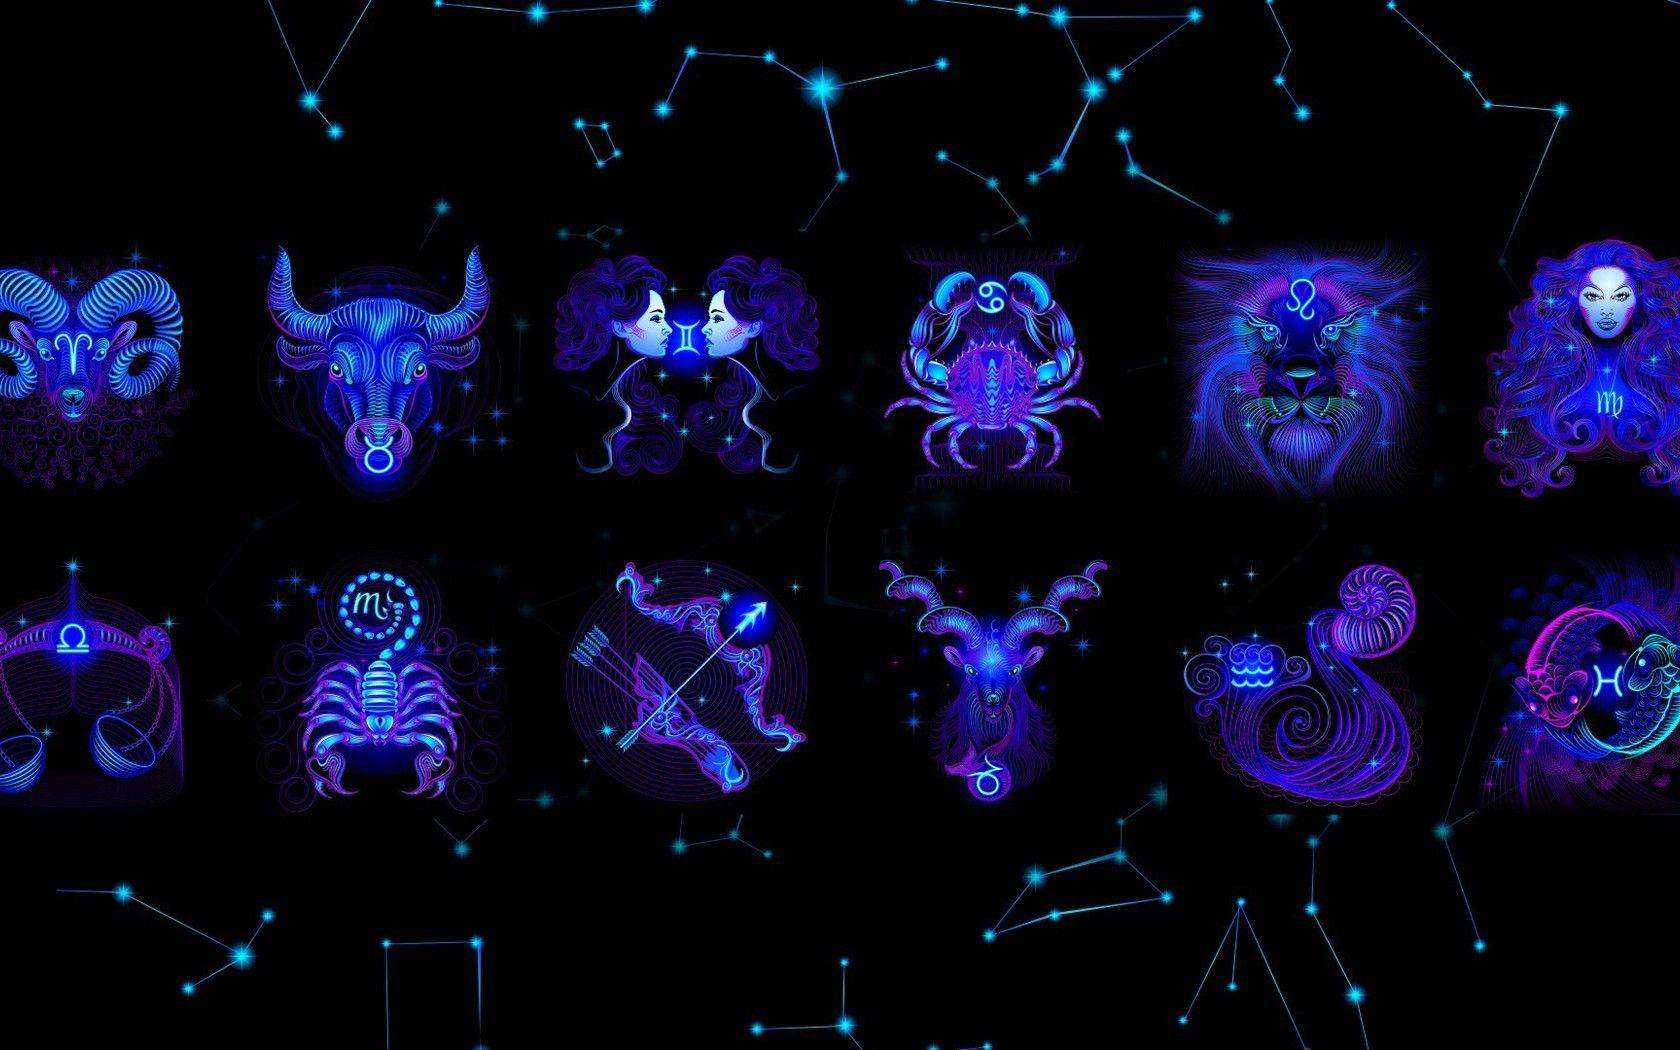 Zodiac signs changing, millions forced to convince themselves